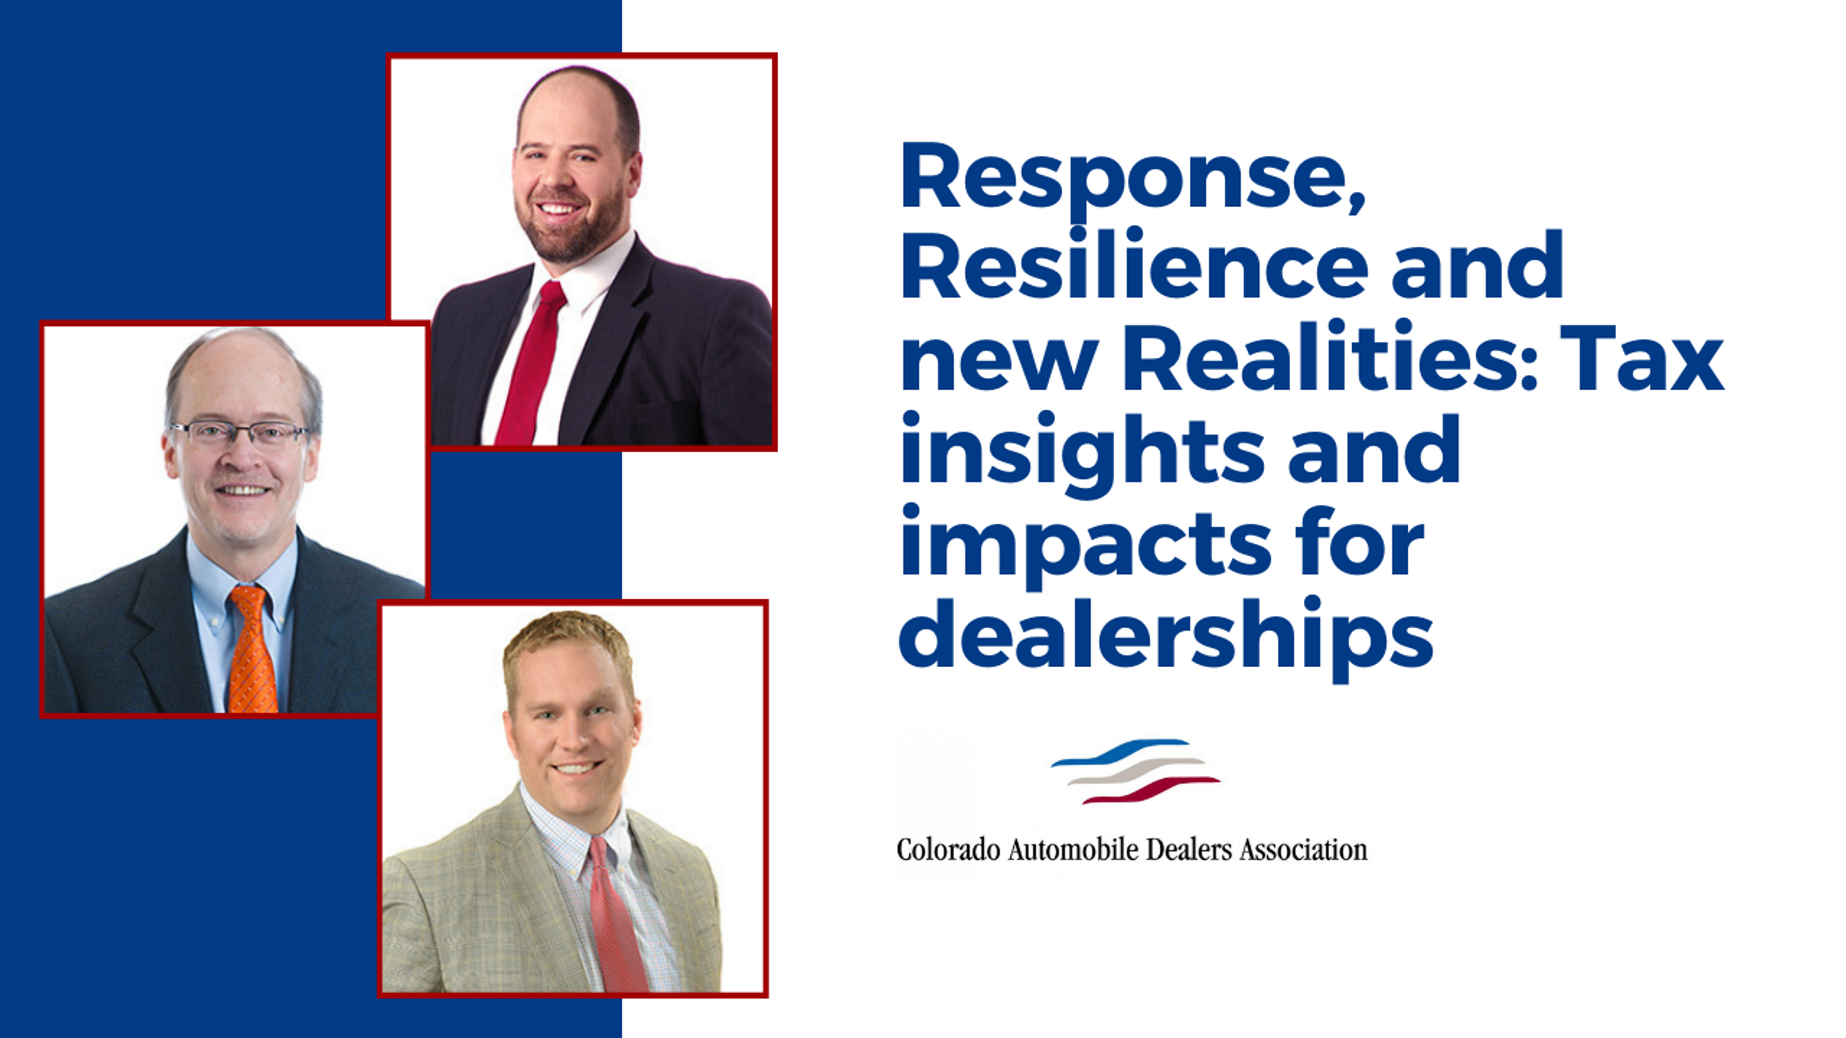 Response, Resilience and new Realities: Tax insights and impacts for dealerships